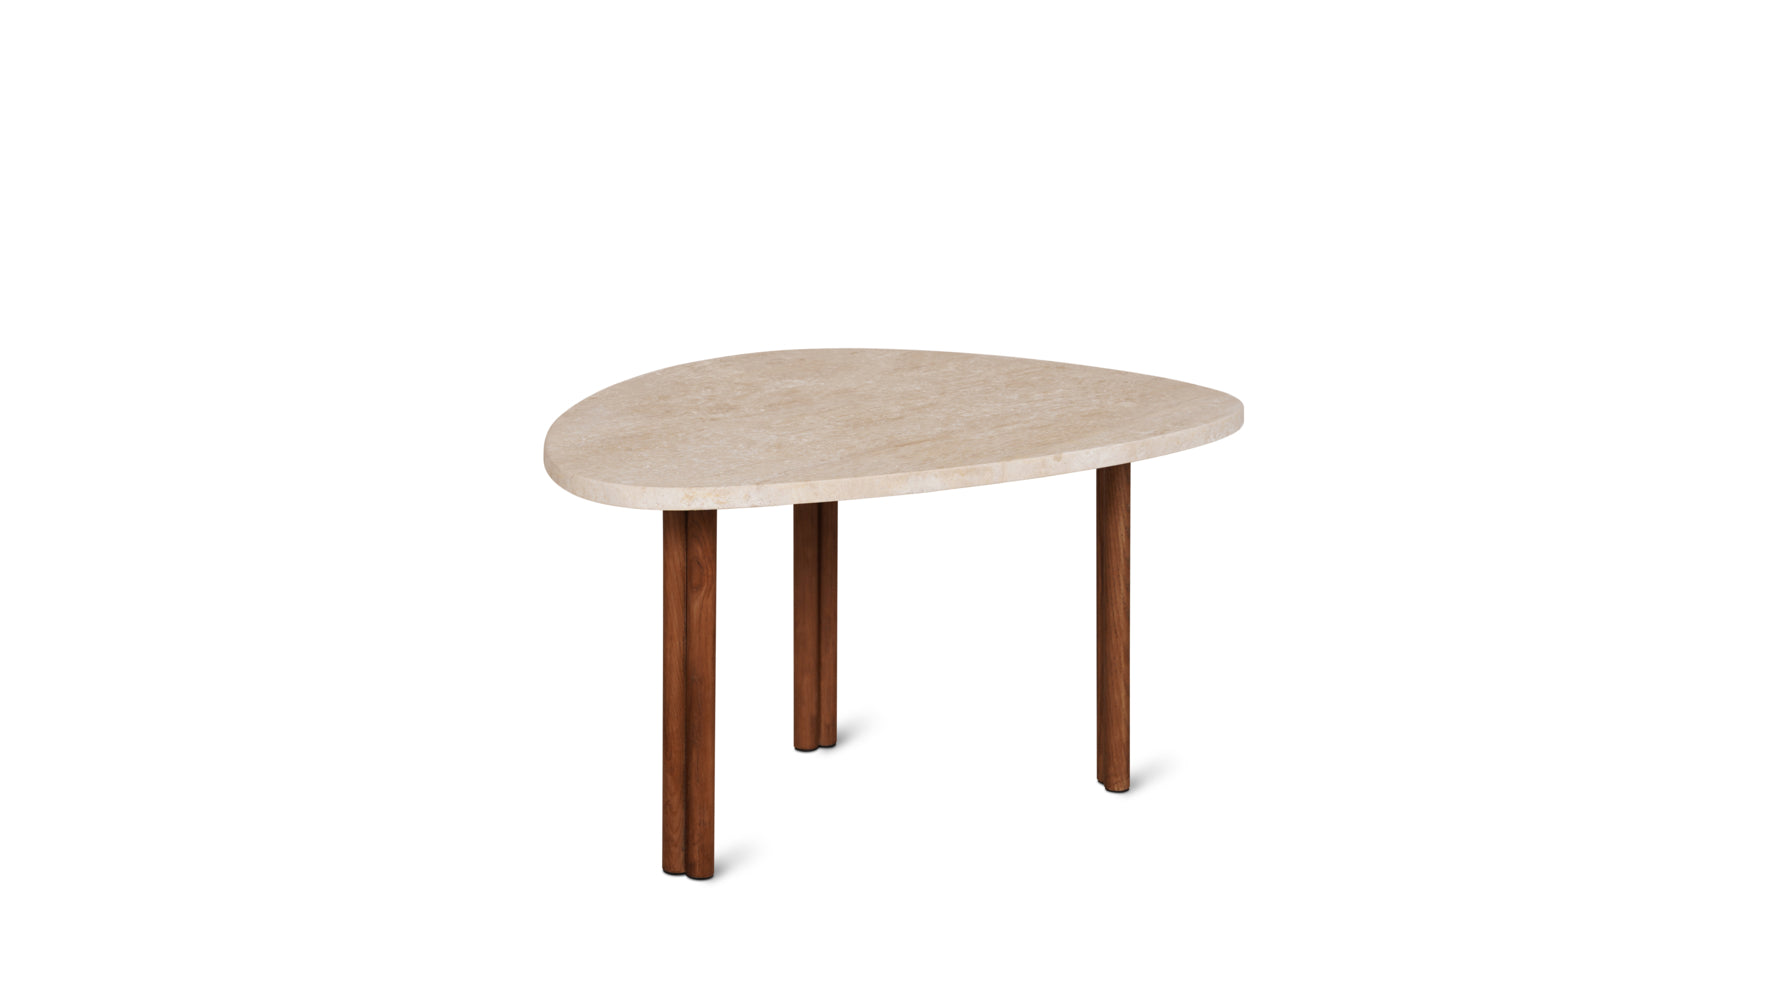 Better Together Coffee Table, Small, Beige Travertine/Walnut Stained Ash - Image 2